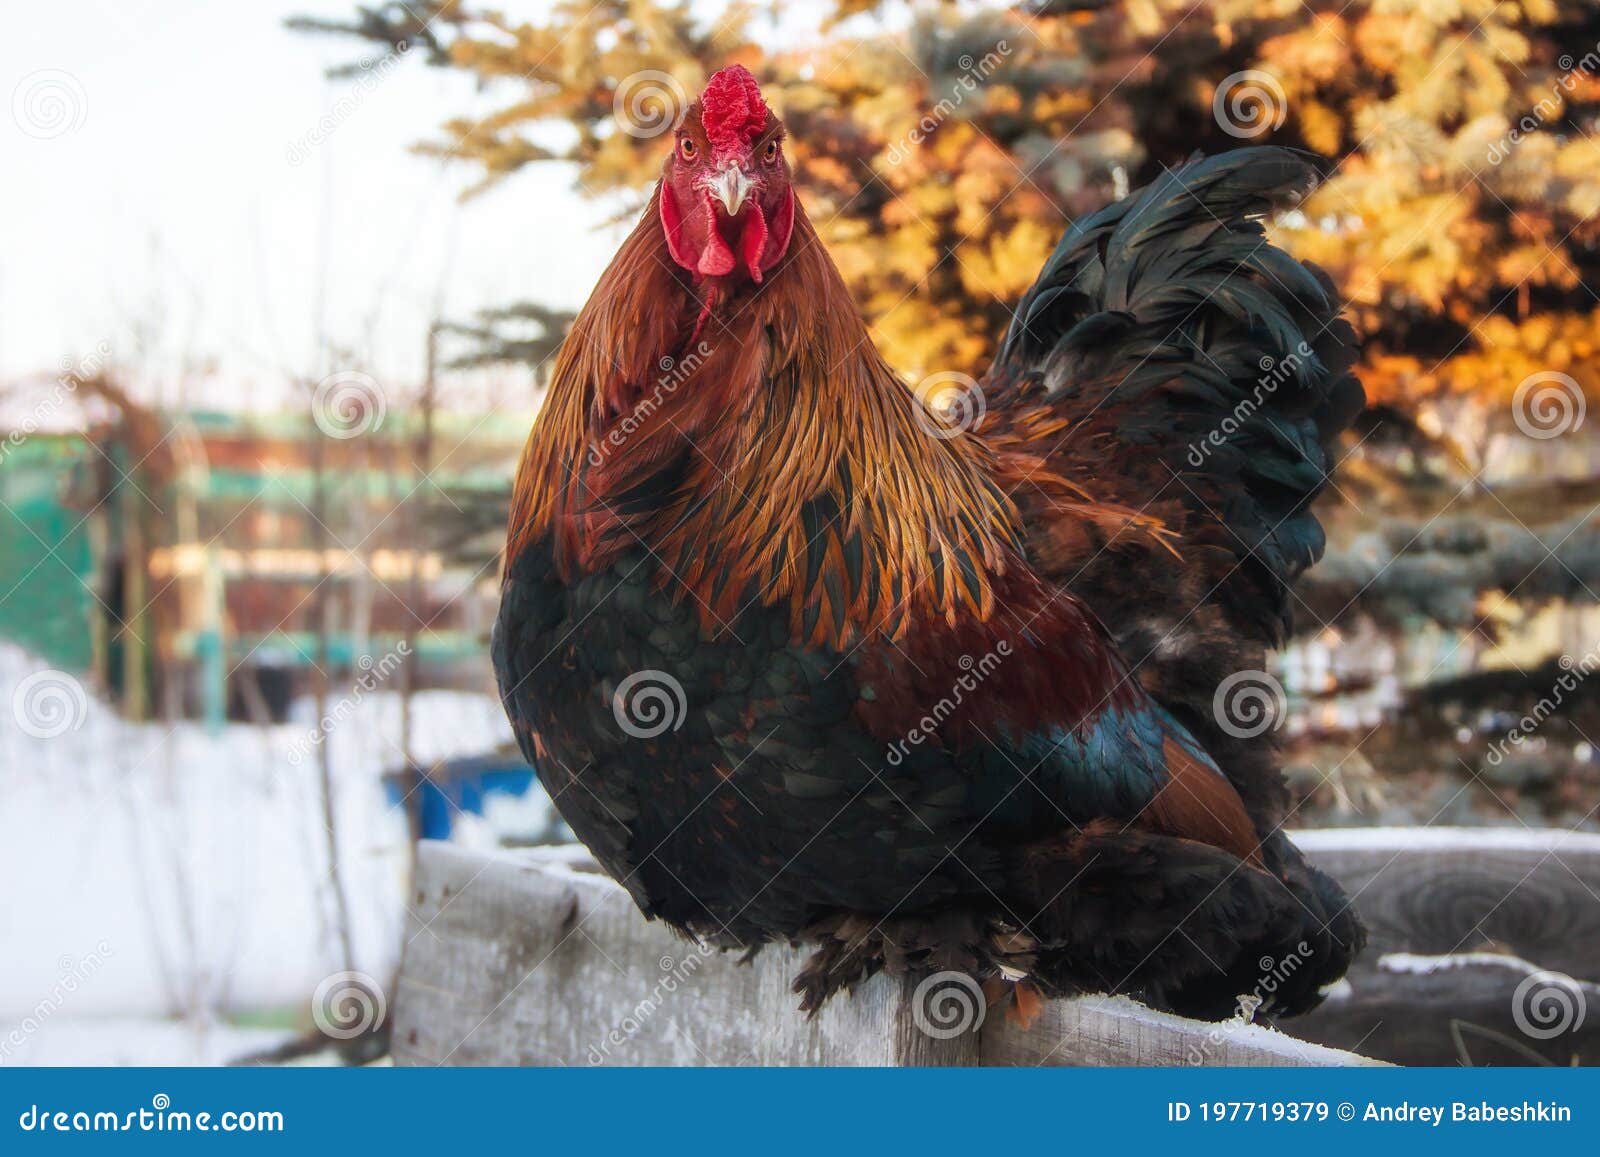 Rooster Brama Stock Photos - Free & Royalty-Free Stock Photos from